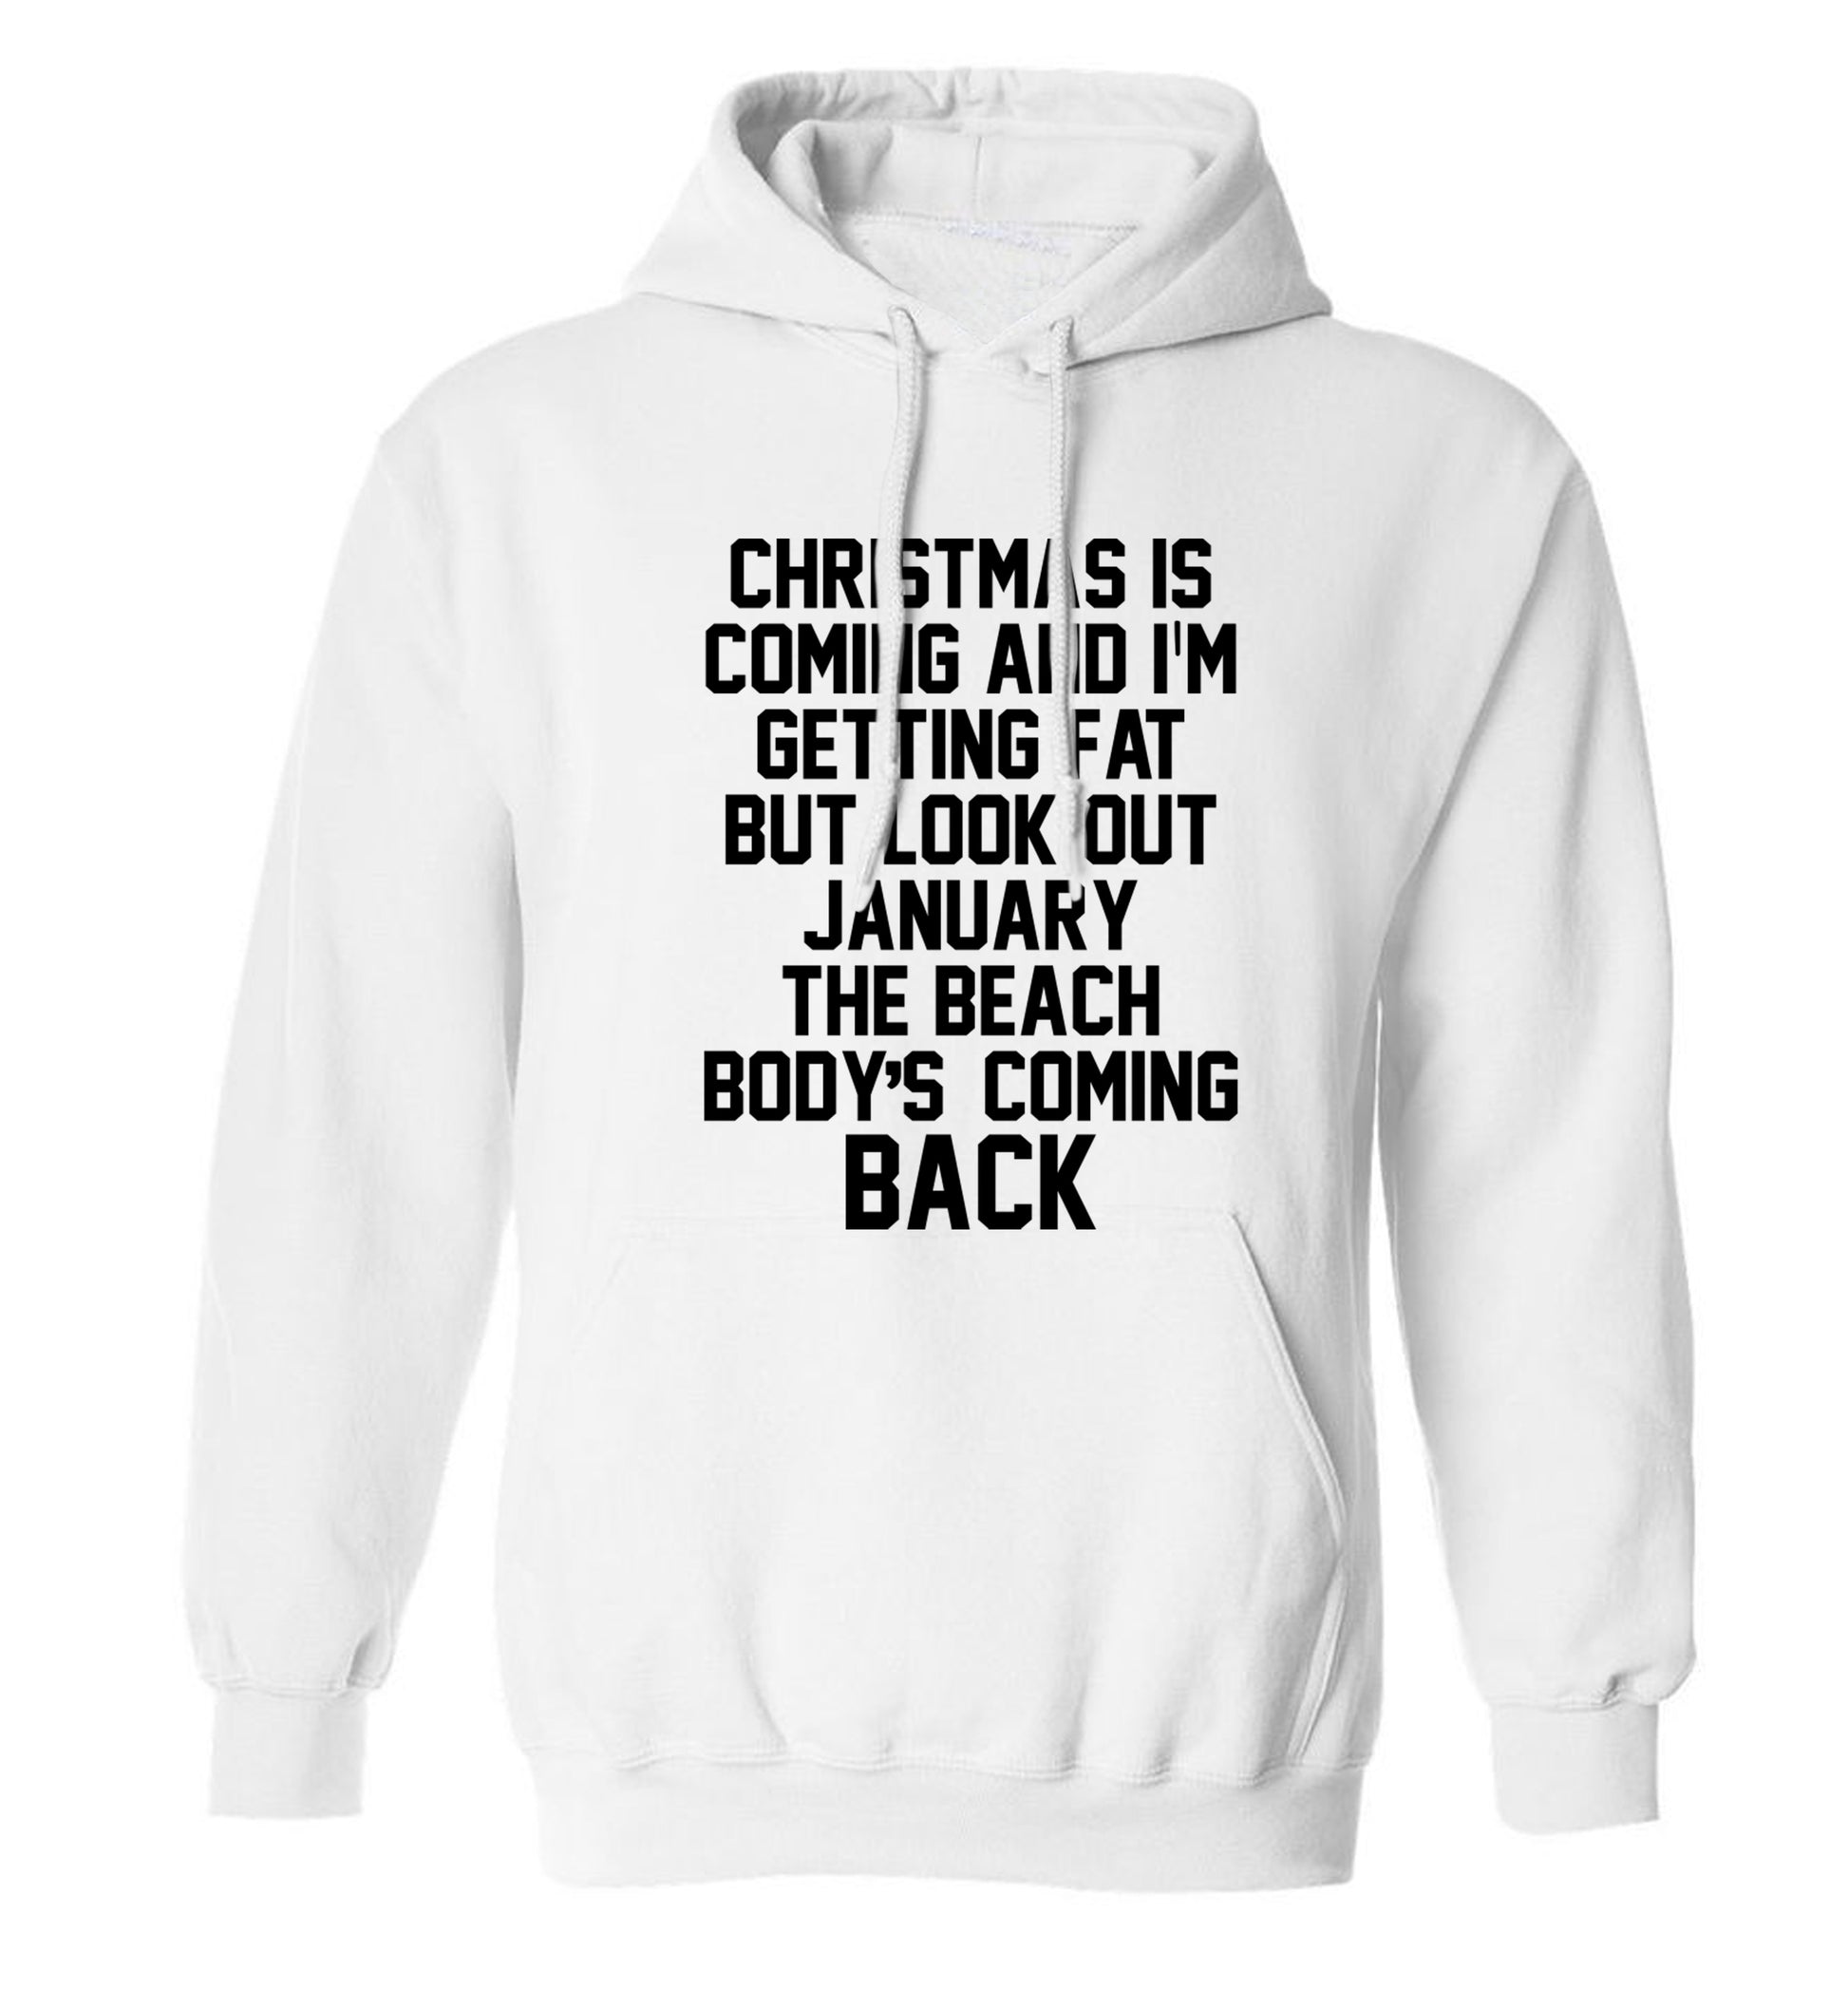 Christmas is coming and I'm getting fat but look out January the beach body's coming back! adults unisex white hoodie 2XL